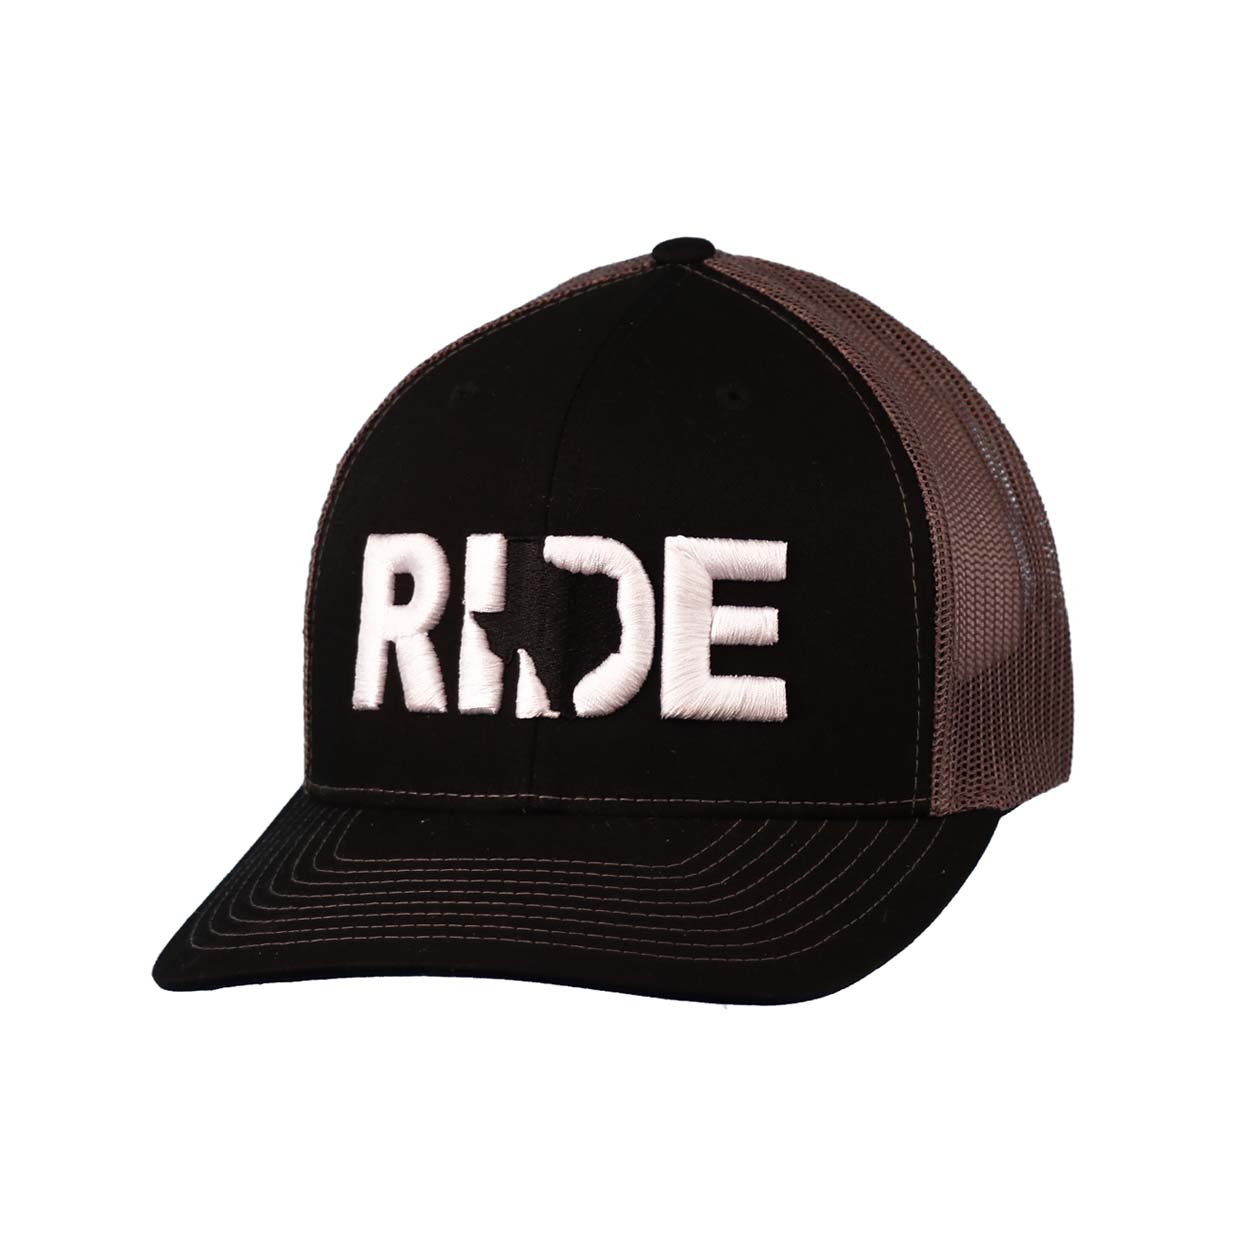 Ride Texas Classic Embroidered Snapback Trucker Hat Black/Gray